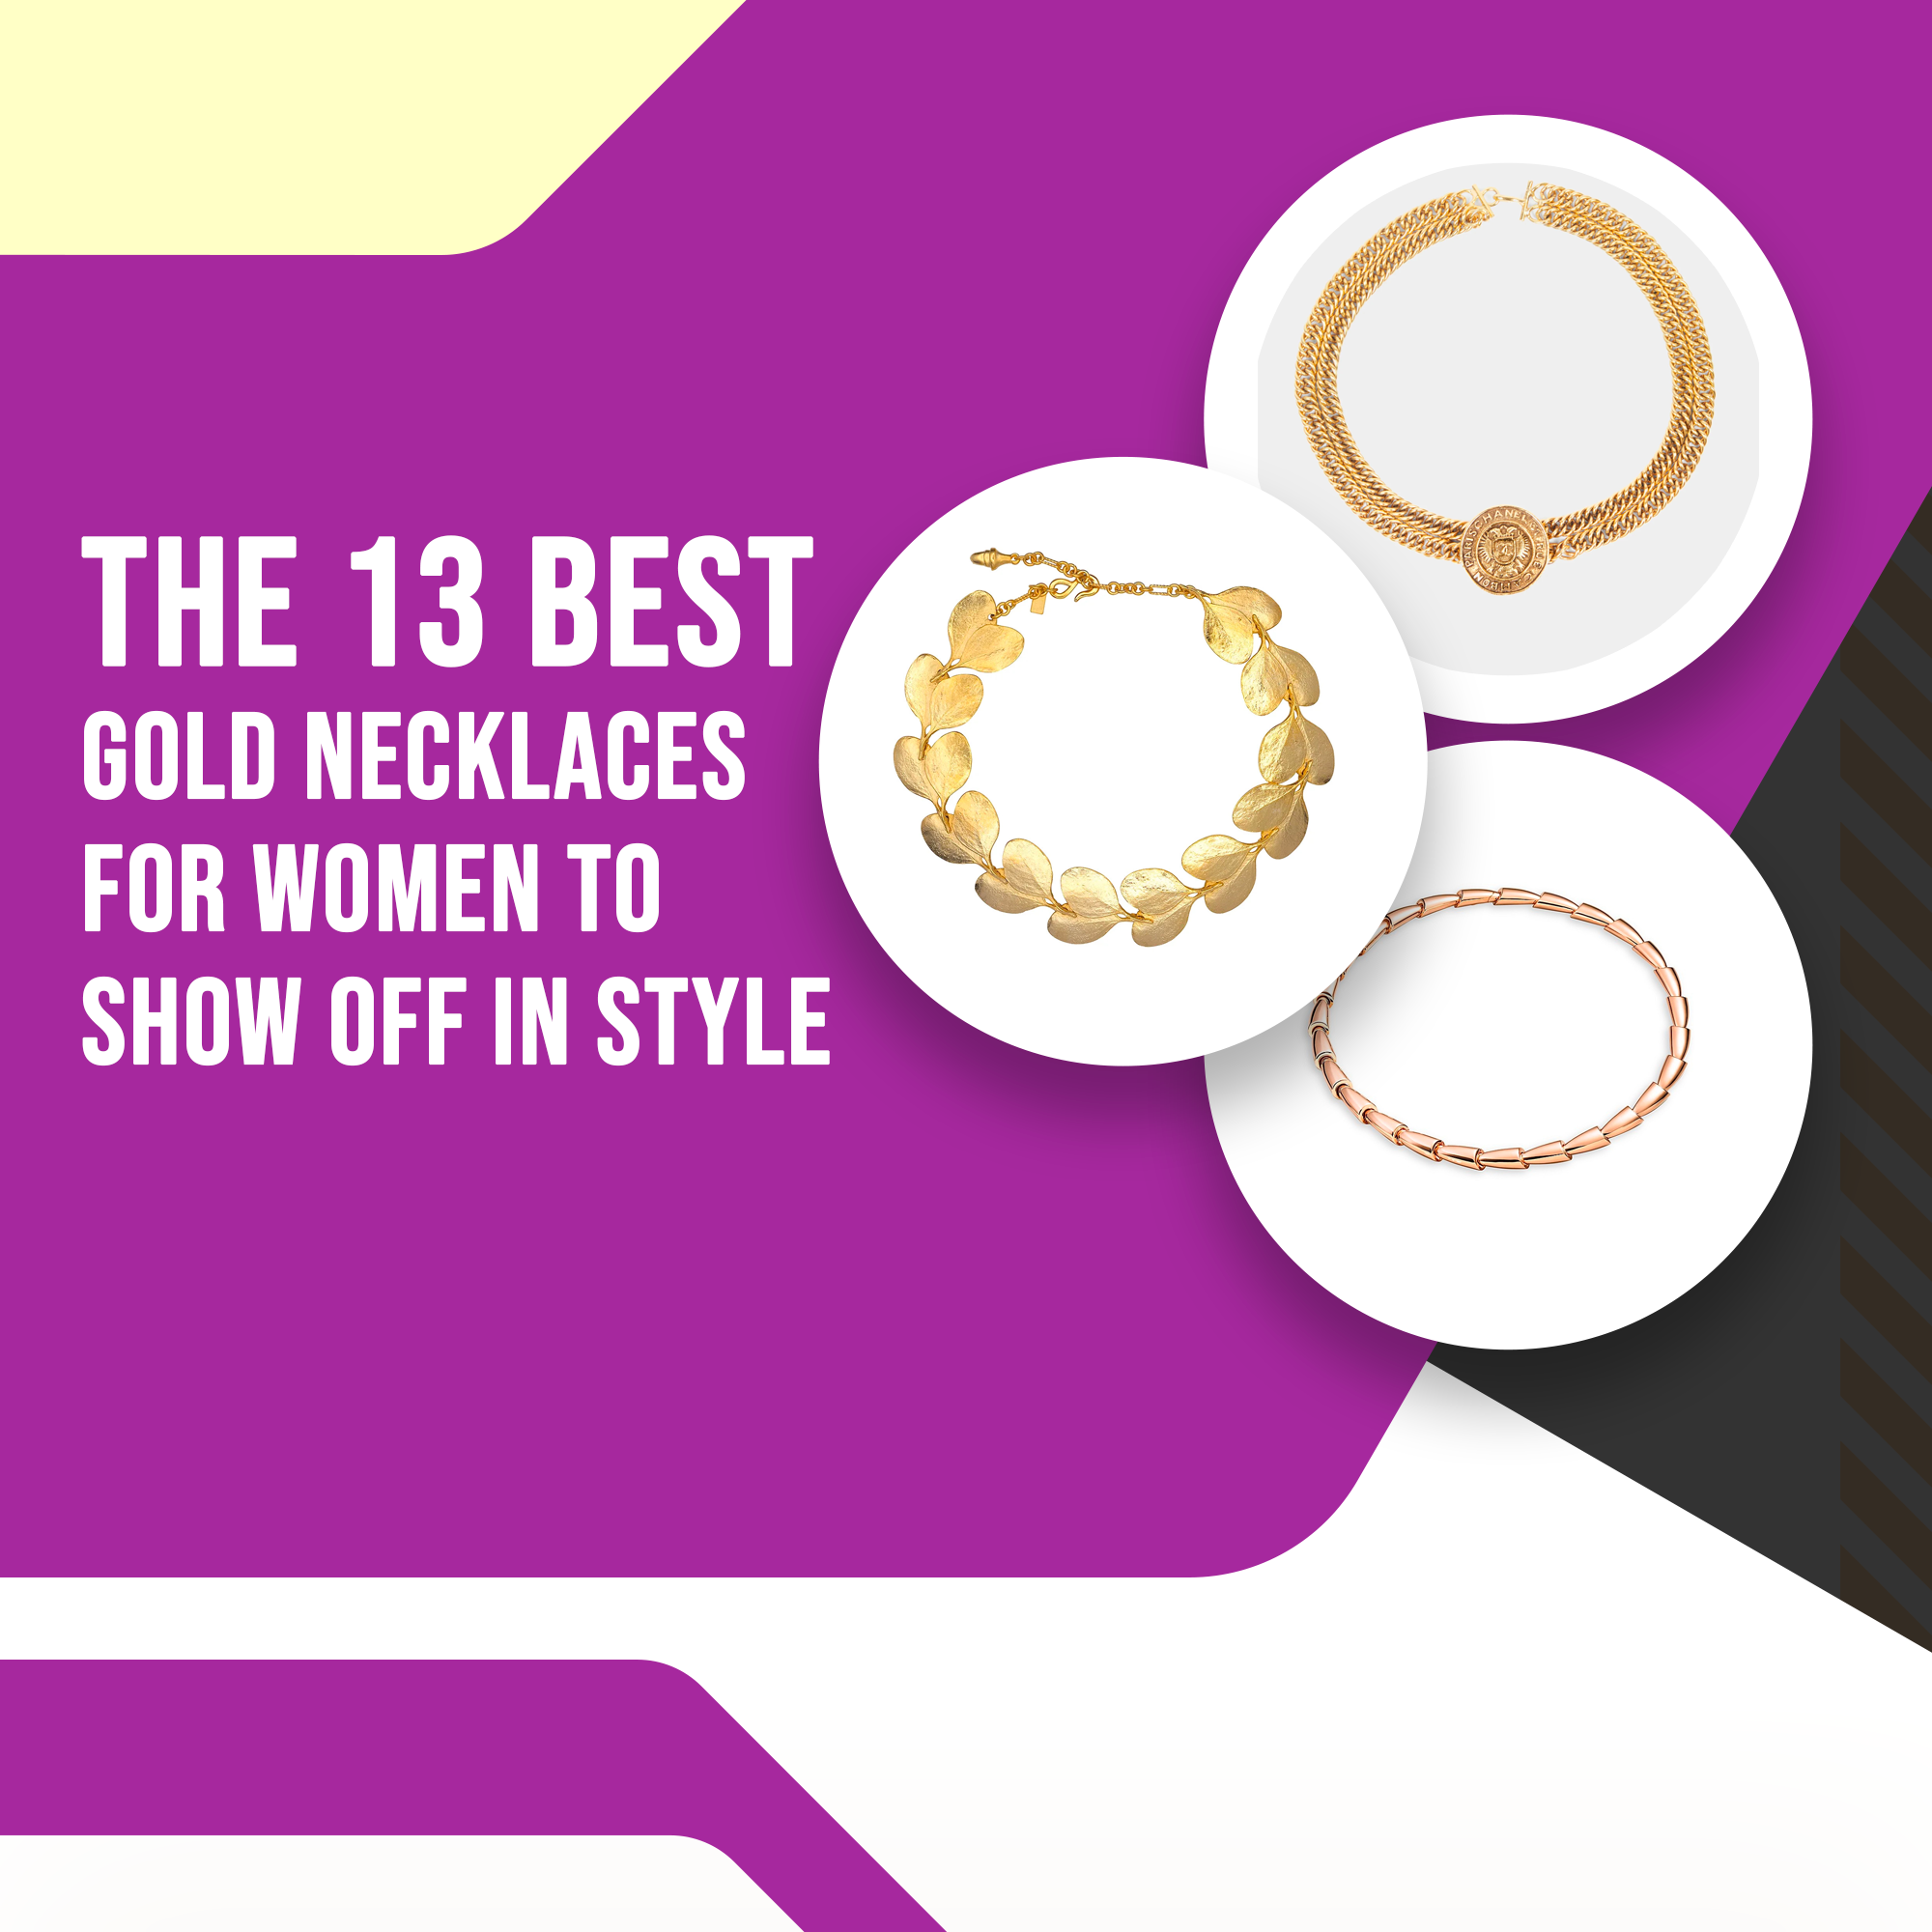 The 13 Best Gold Necklaces for Women to Show Off in Style